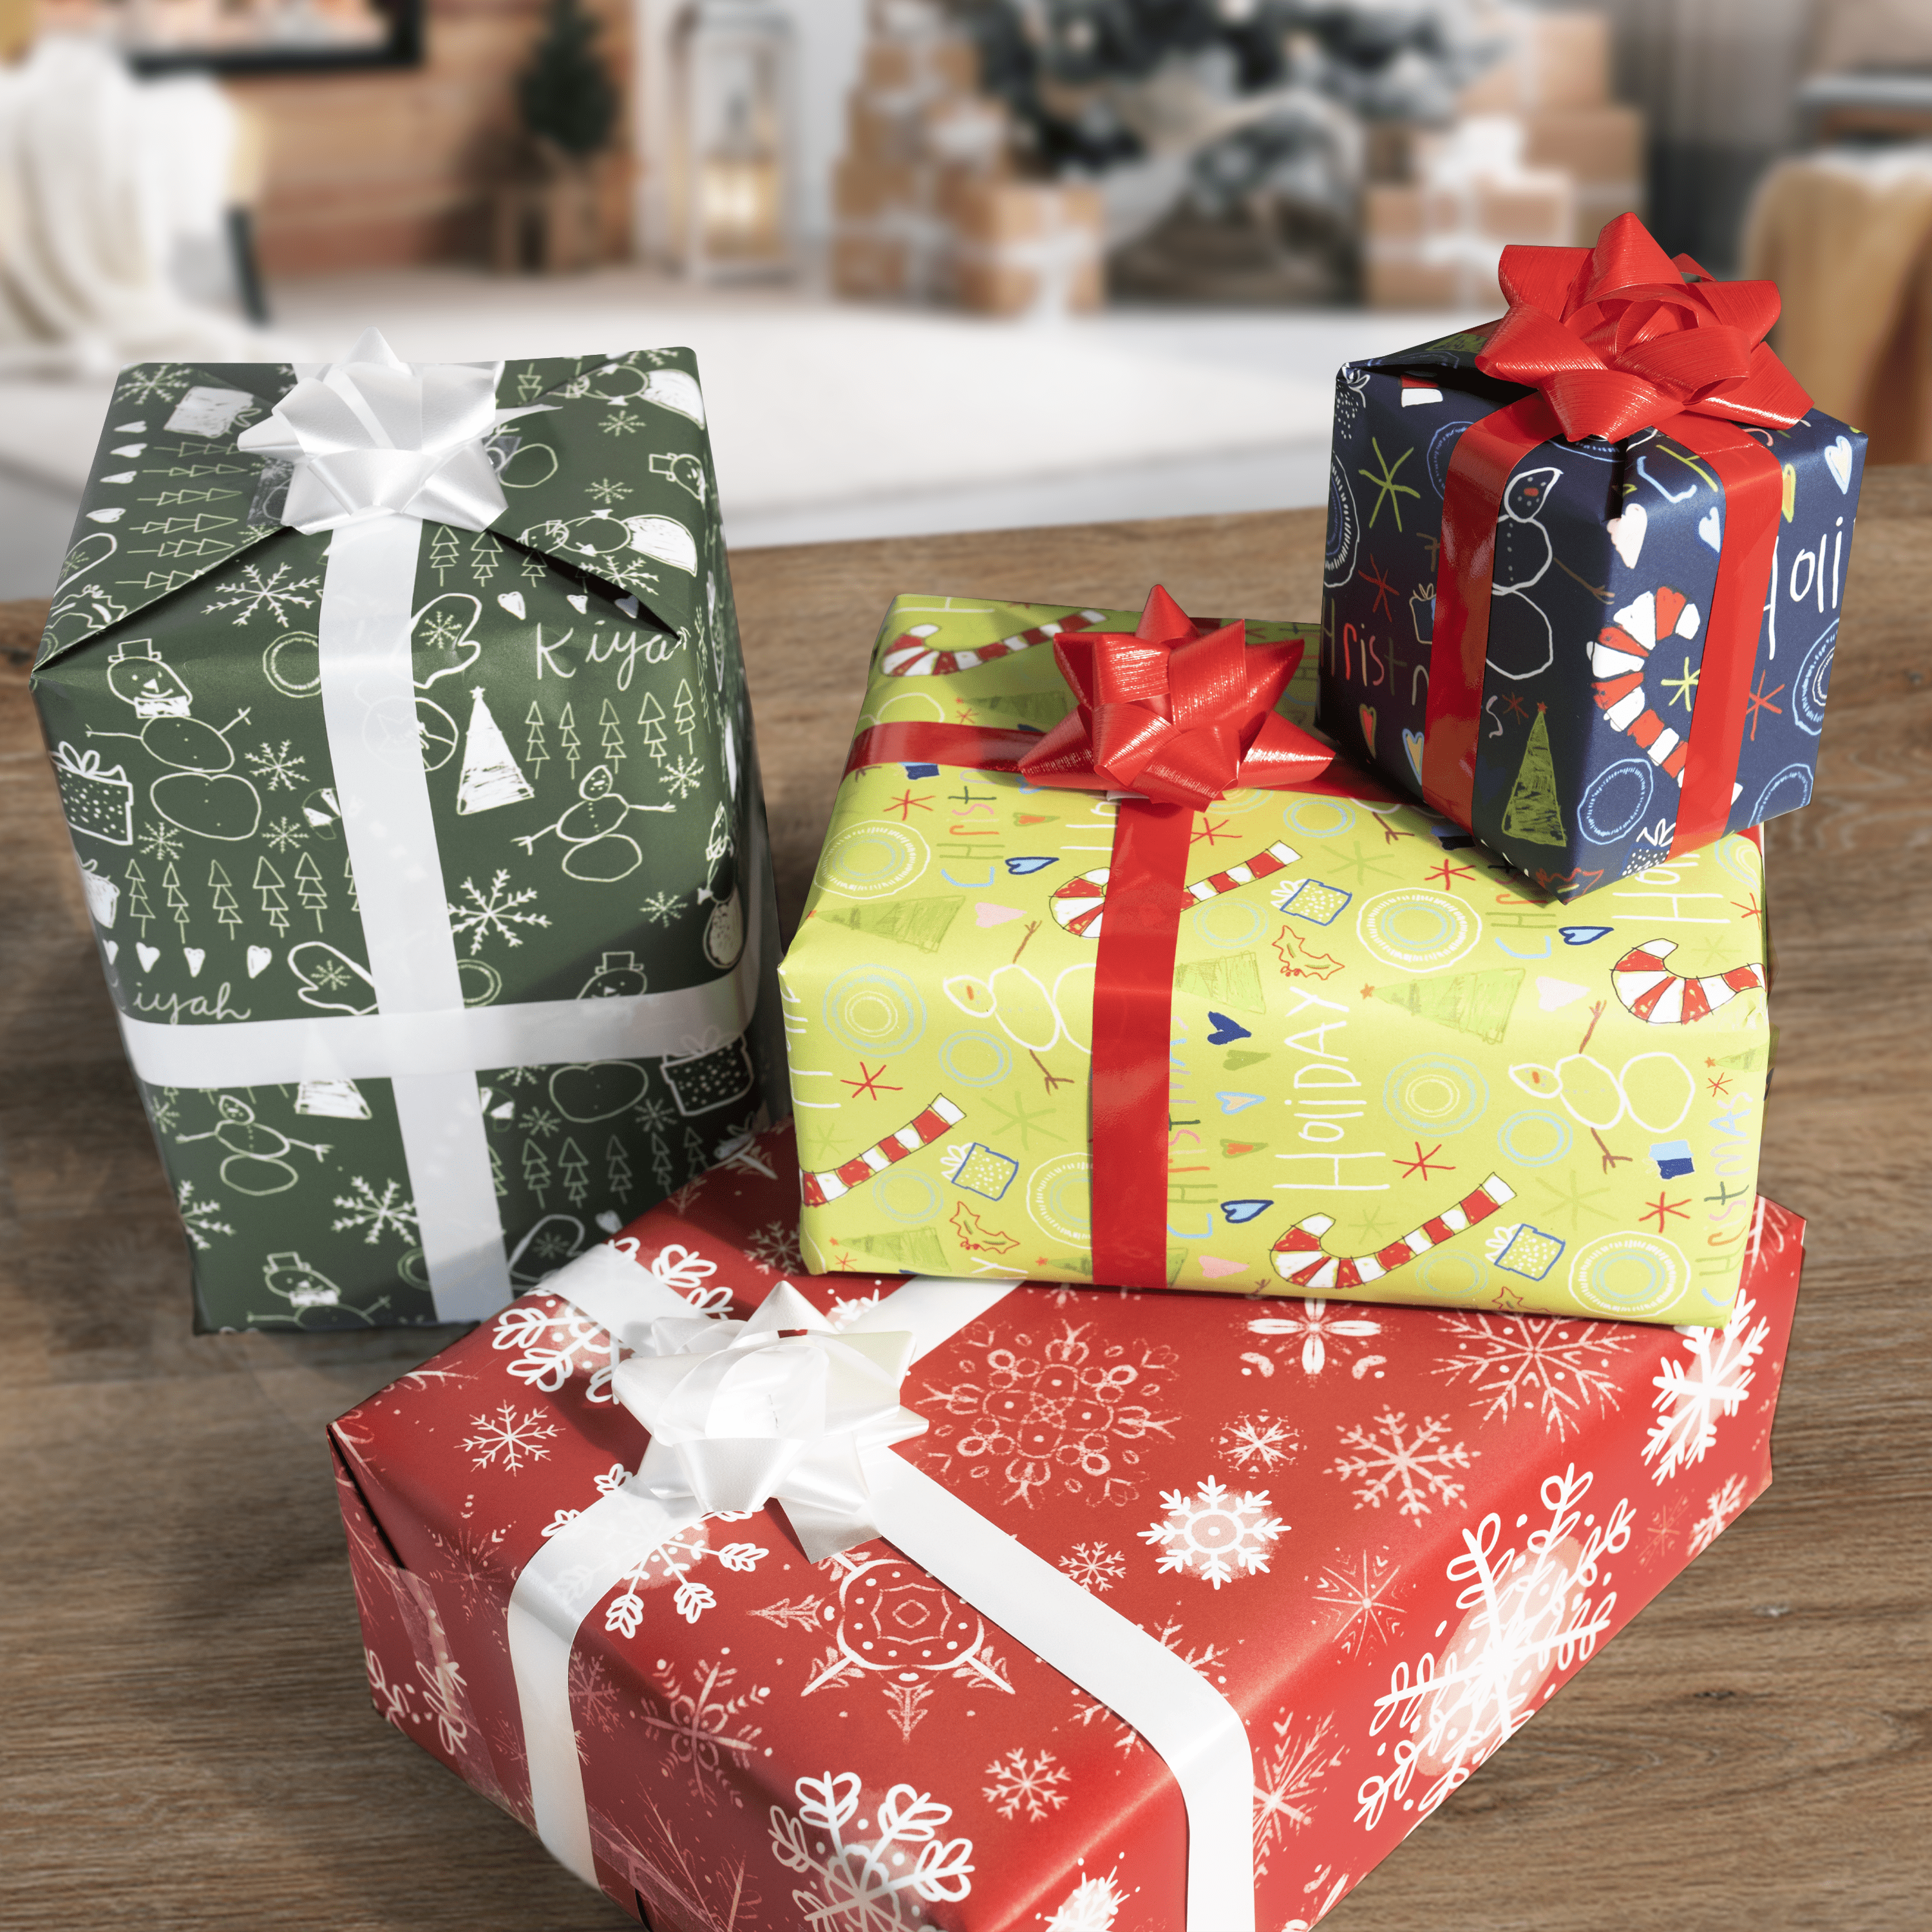 Uniquely Designed Holiday Wrapping Paper-Set 1